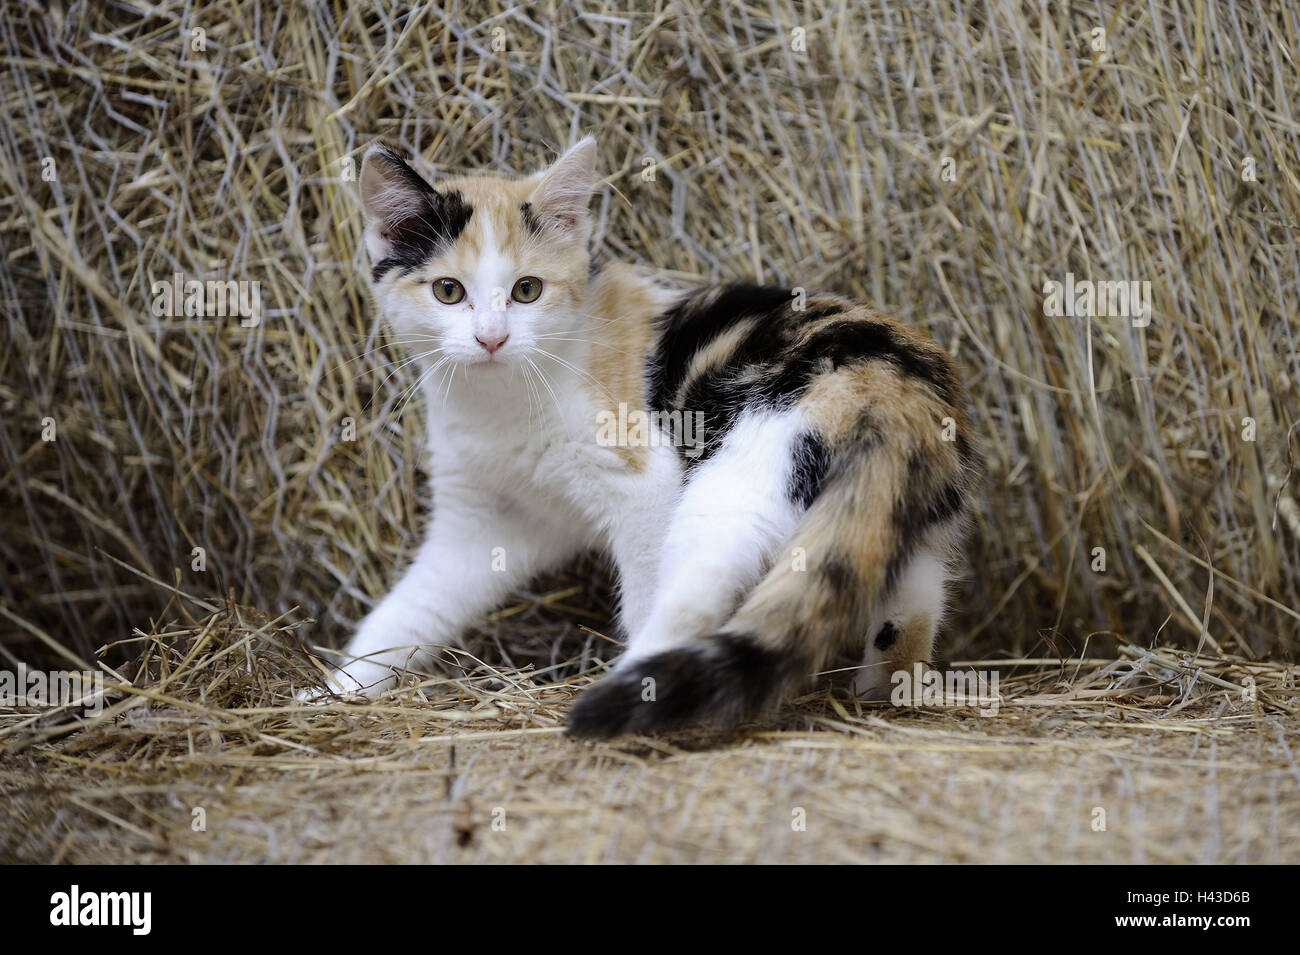 Hay bales, cat, three-coloured, animal, mammal, house cat, pet, outside, attention, Stock Photo